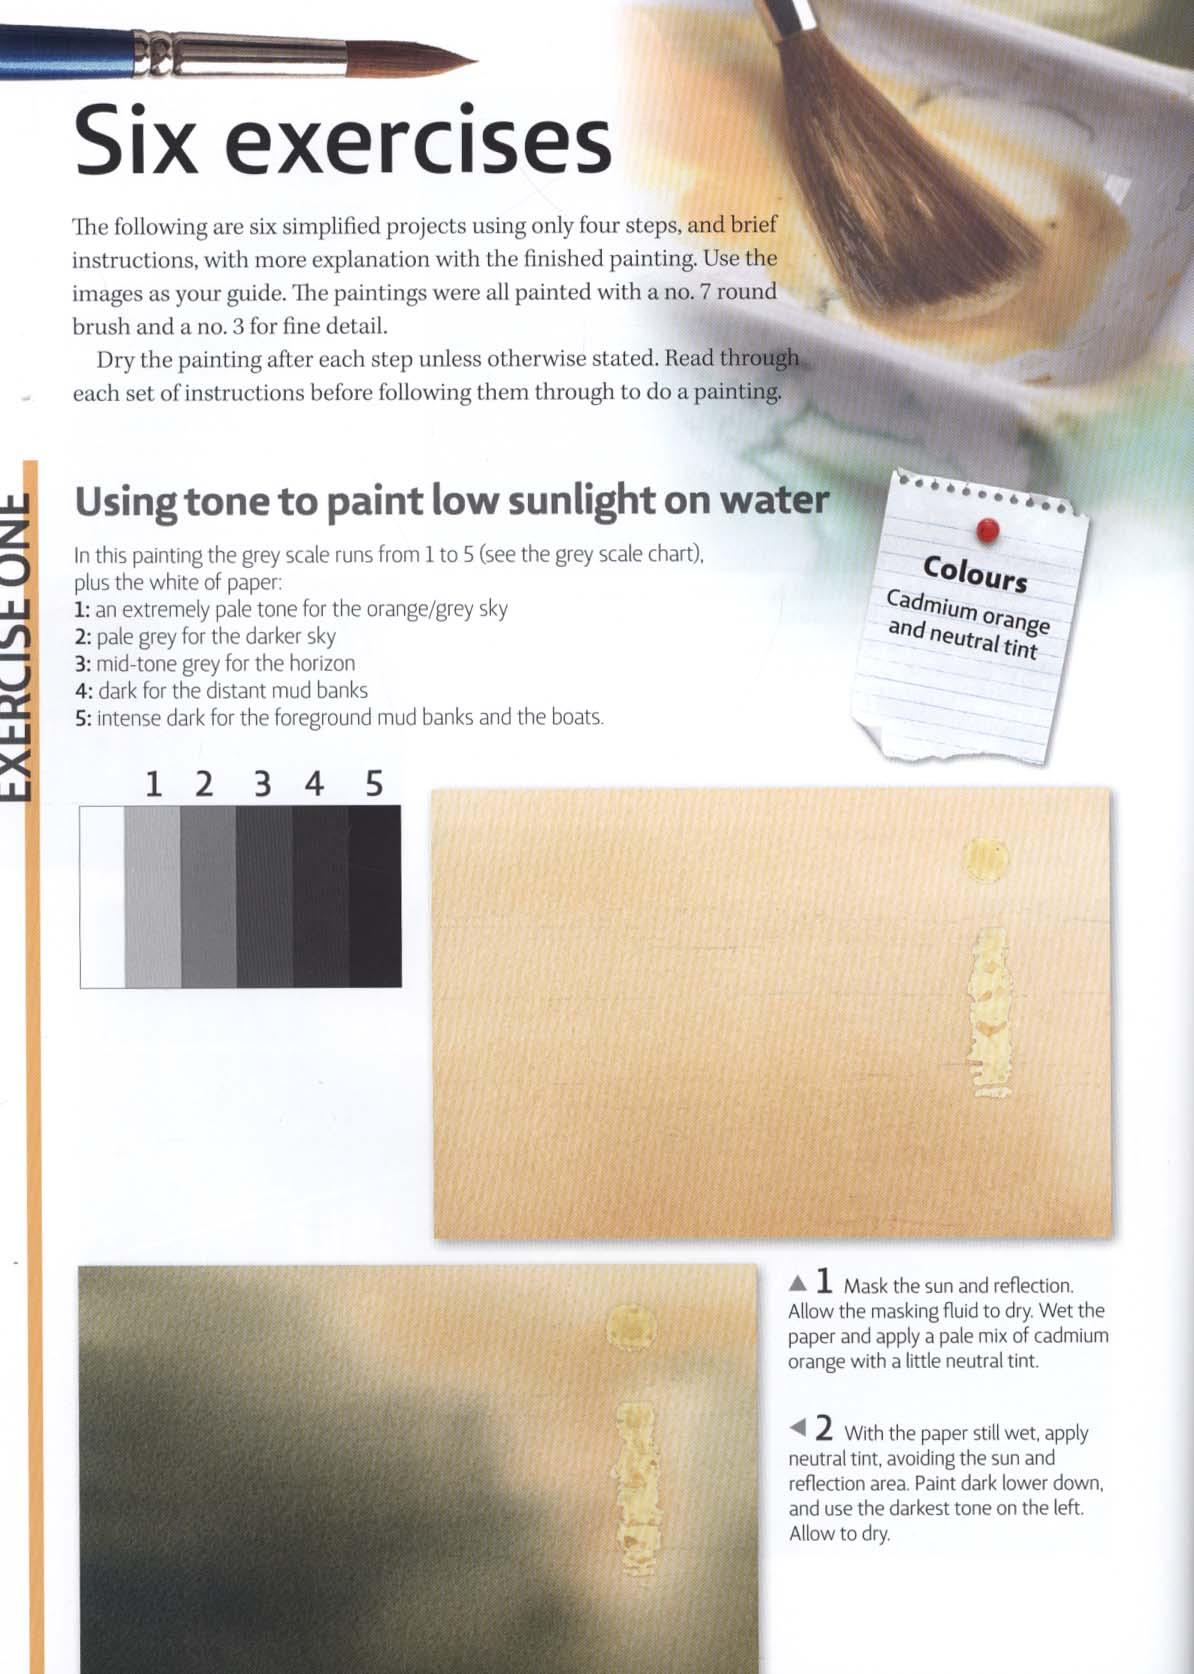 How to Paint Water in Watercolour